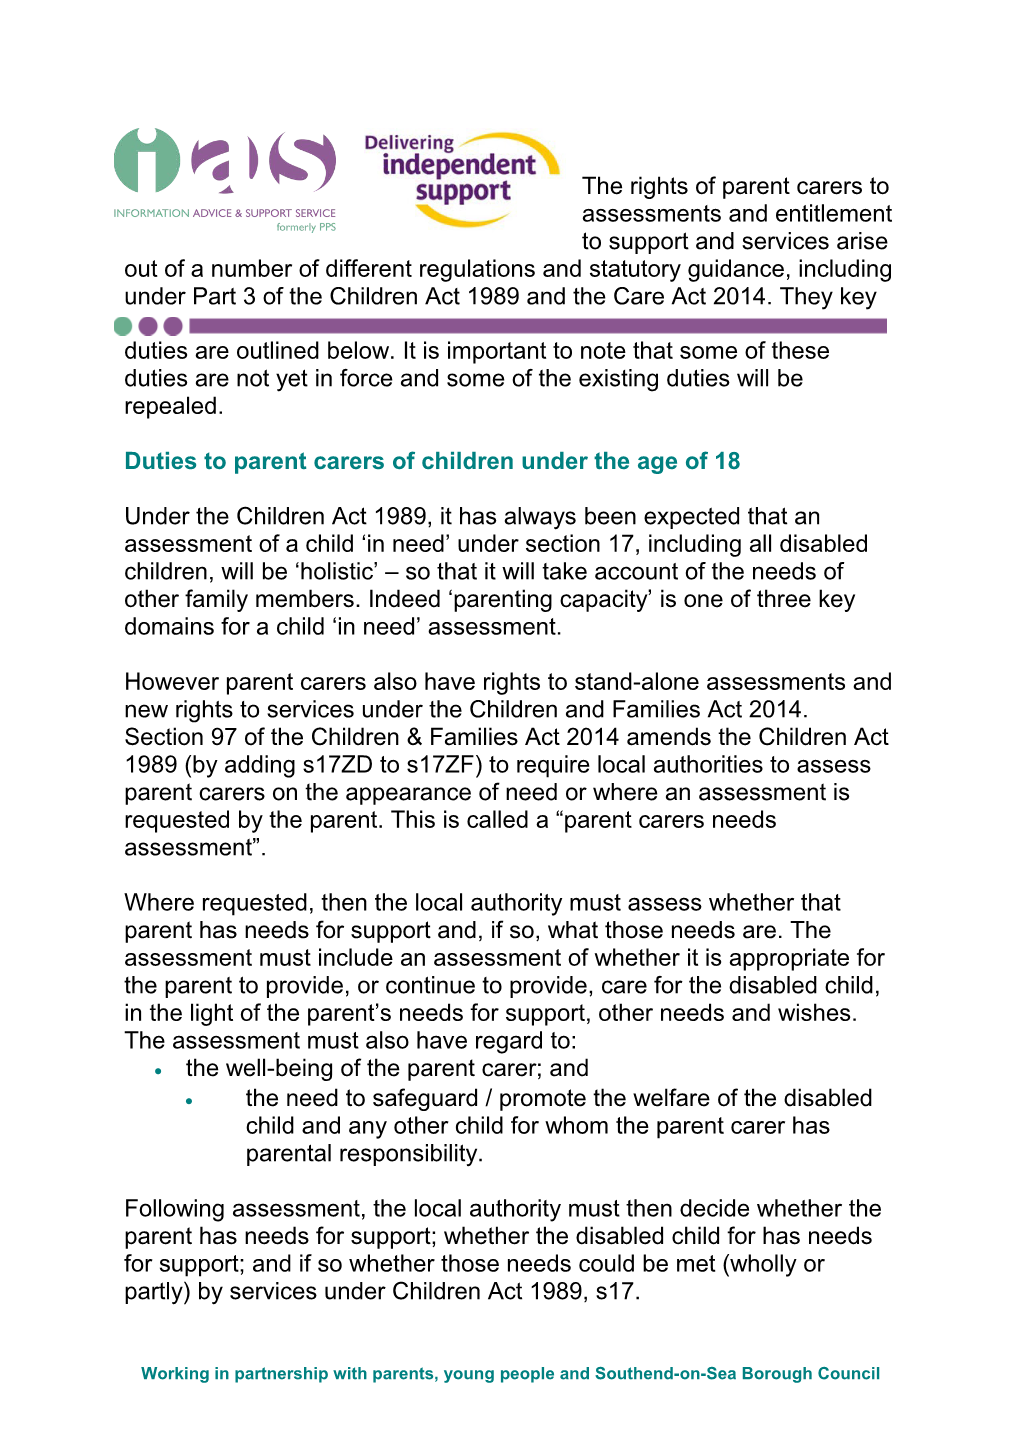 Duties to Parent Carers of Children Under the Age of 18